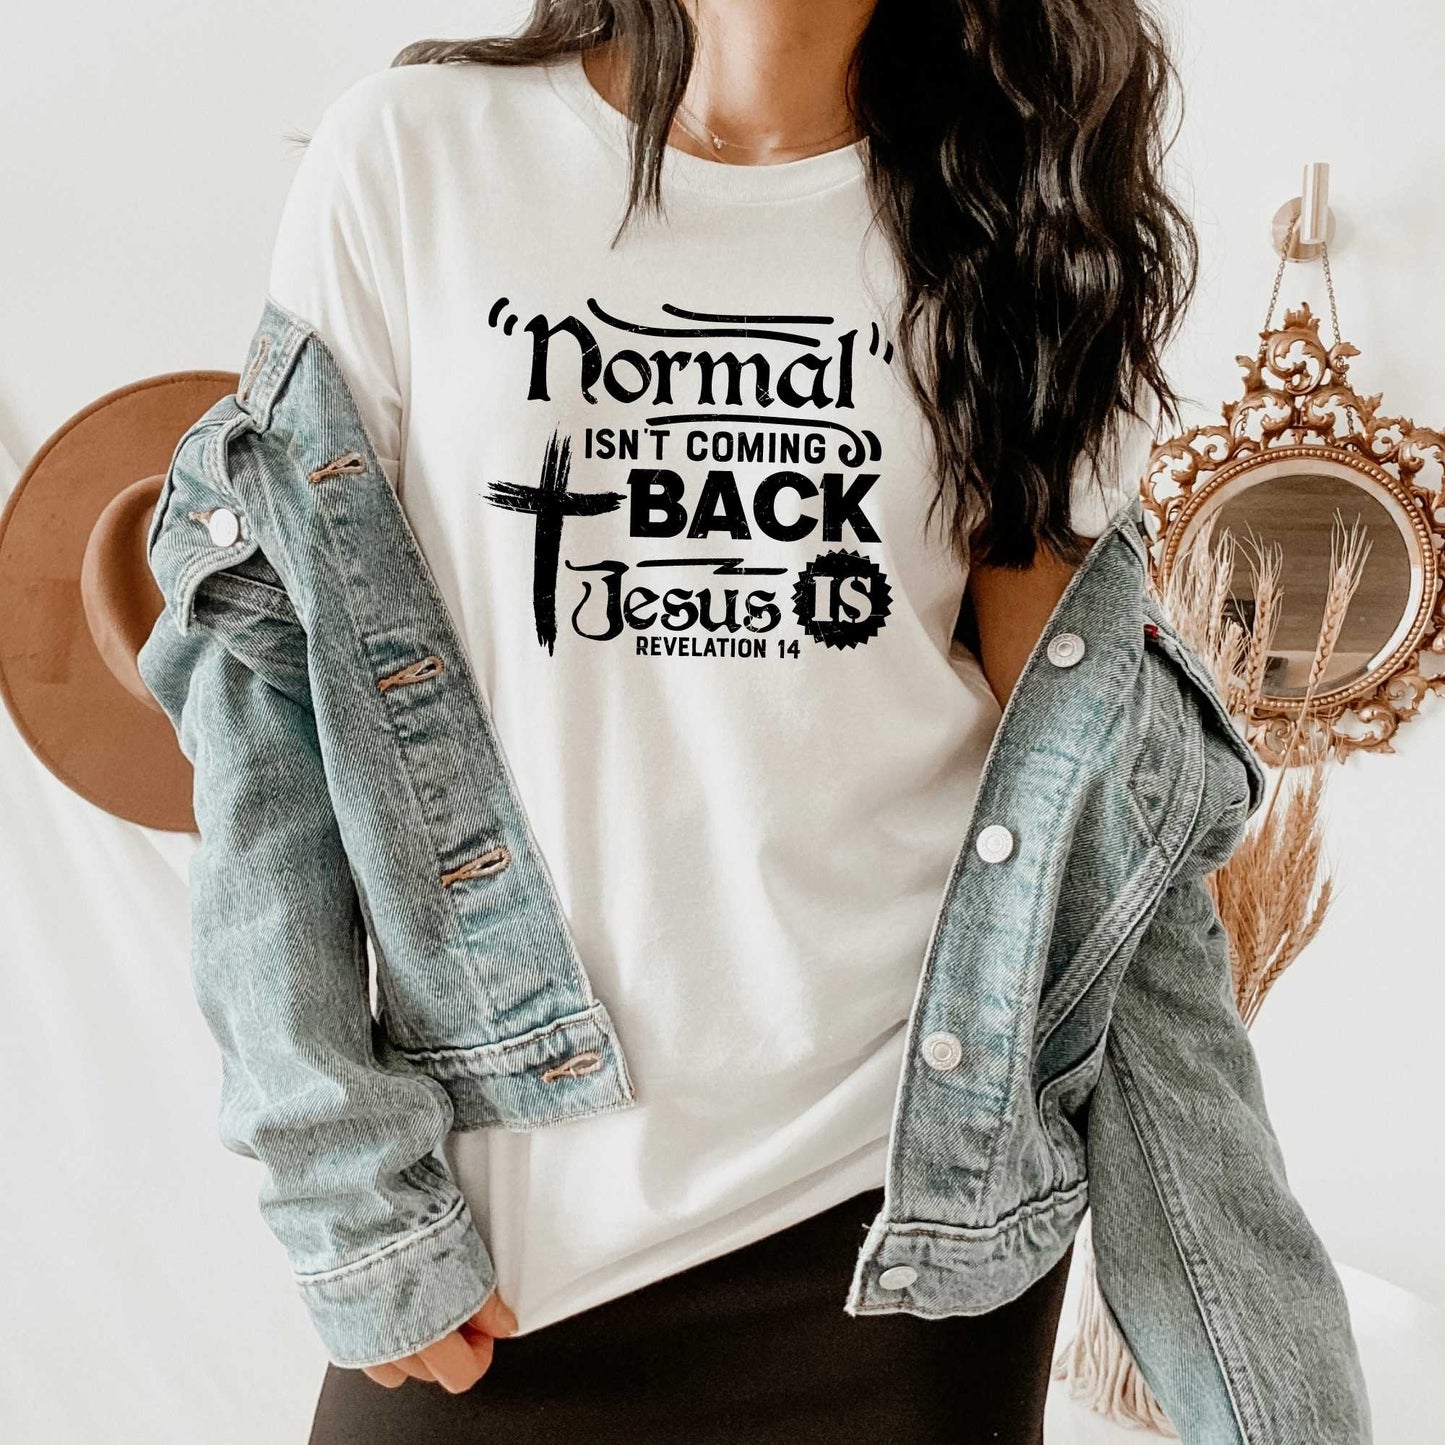 Normal Isn't Coming Back But Jesus Is, Edgy Christian Shirts